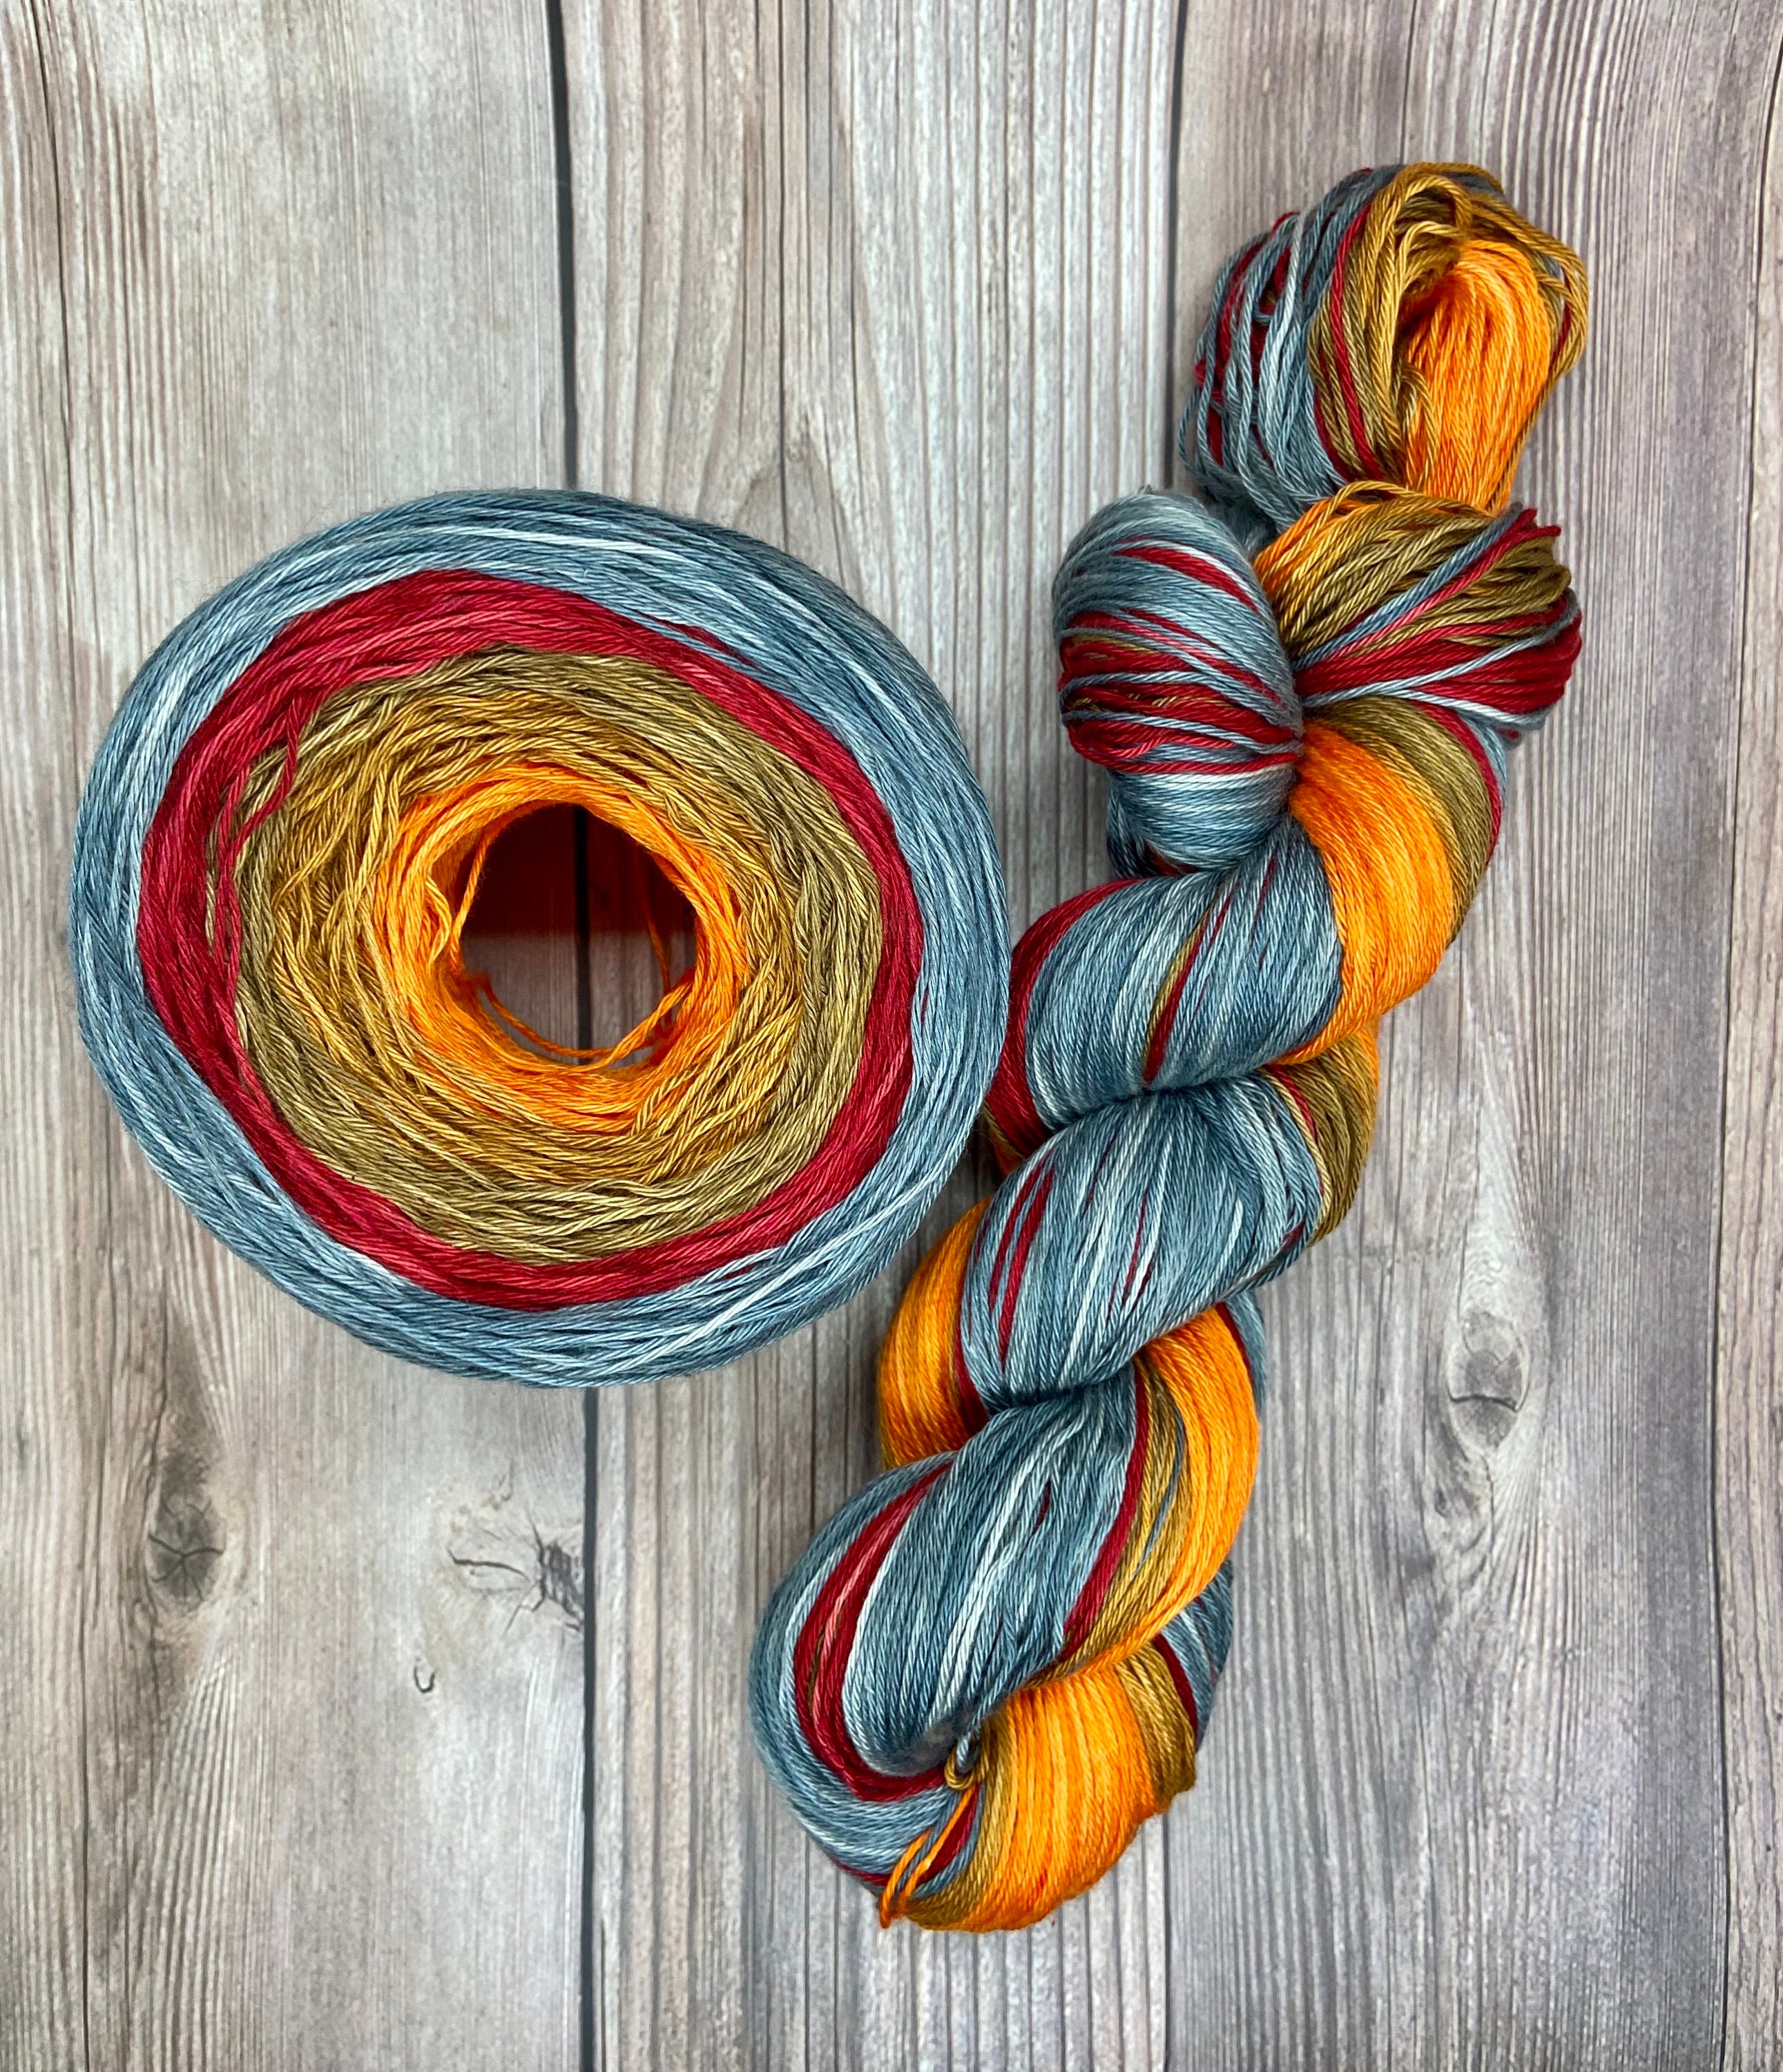 In Technicolor Sonsy Sock Yarn Set / Indie Dyed / Hand Dyed